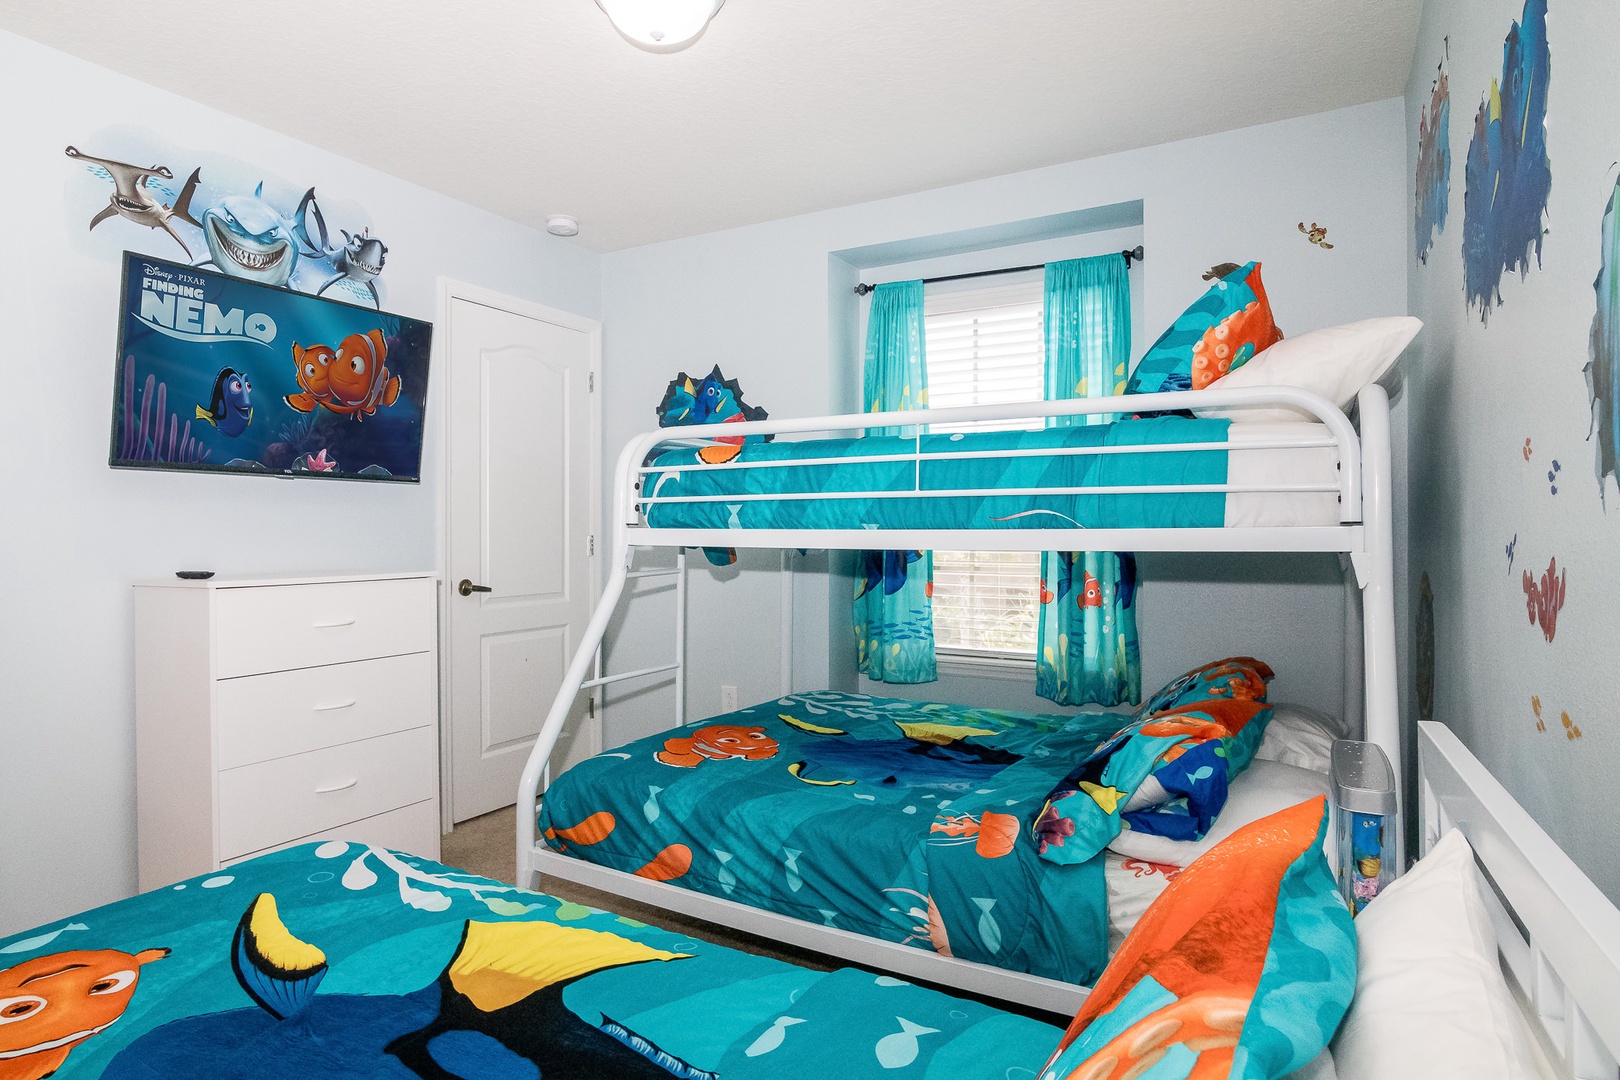 Bedroom 3 Finding Nemo themed with Twin/Queen bunk bed, Twin bed, and Smart TV (2nd floor)